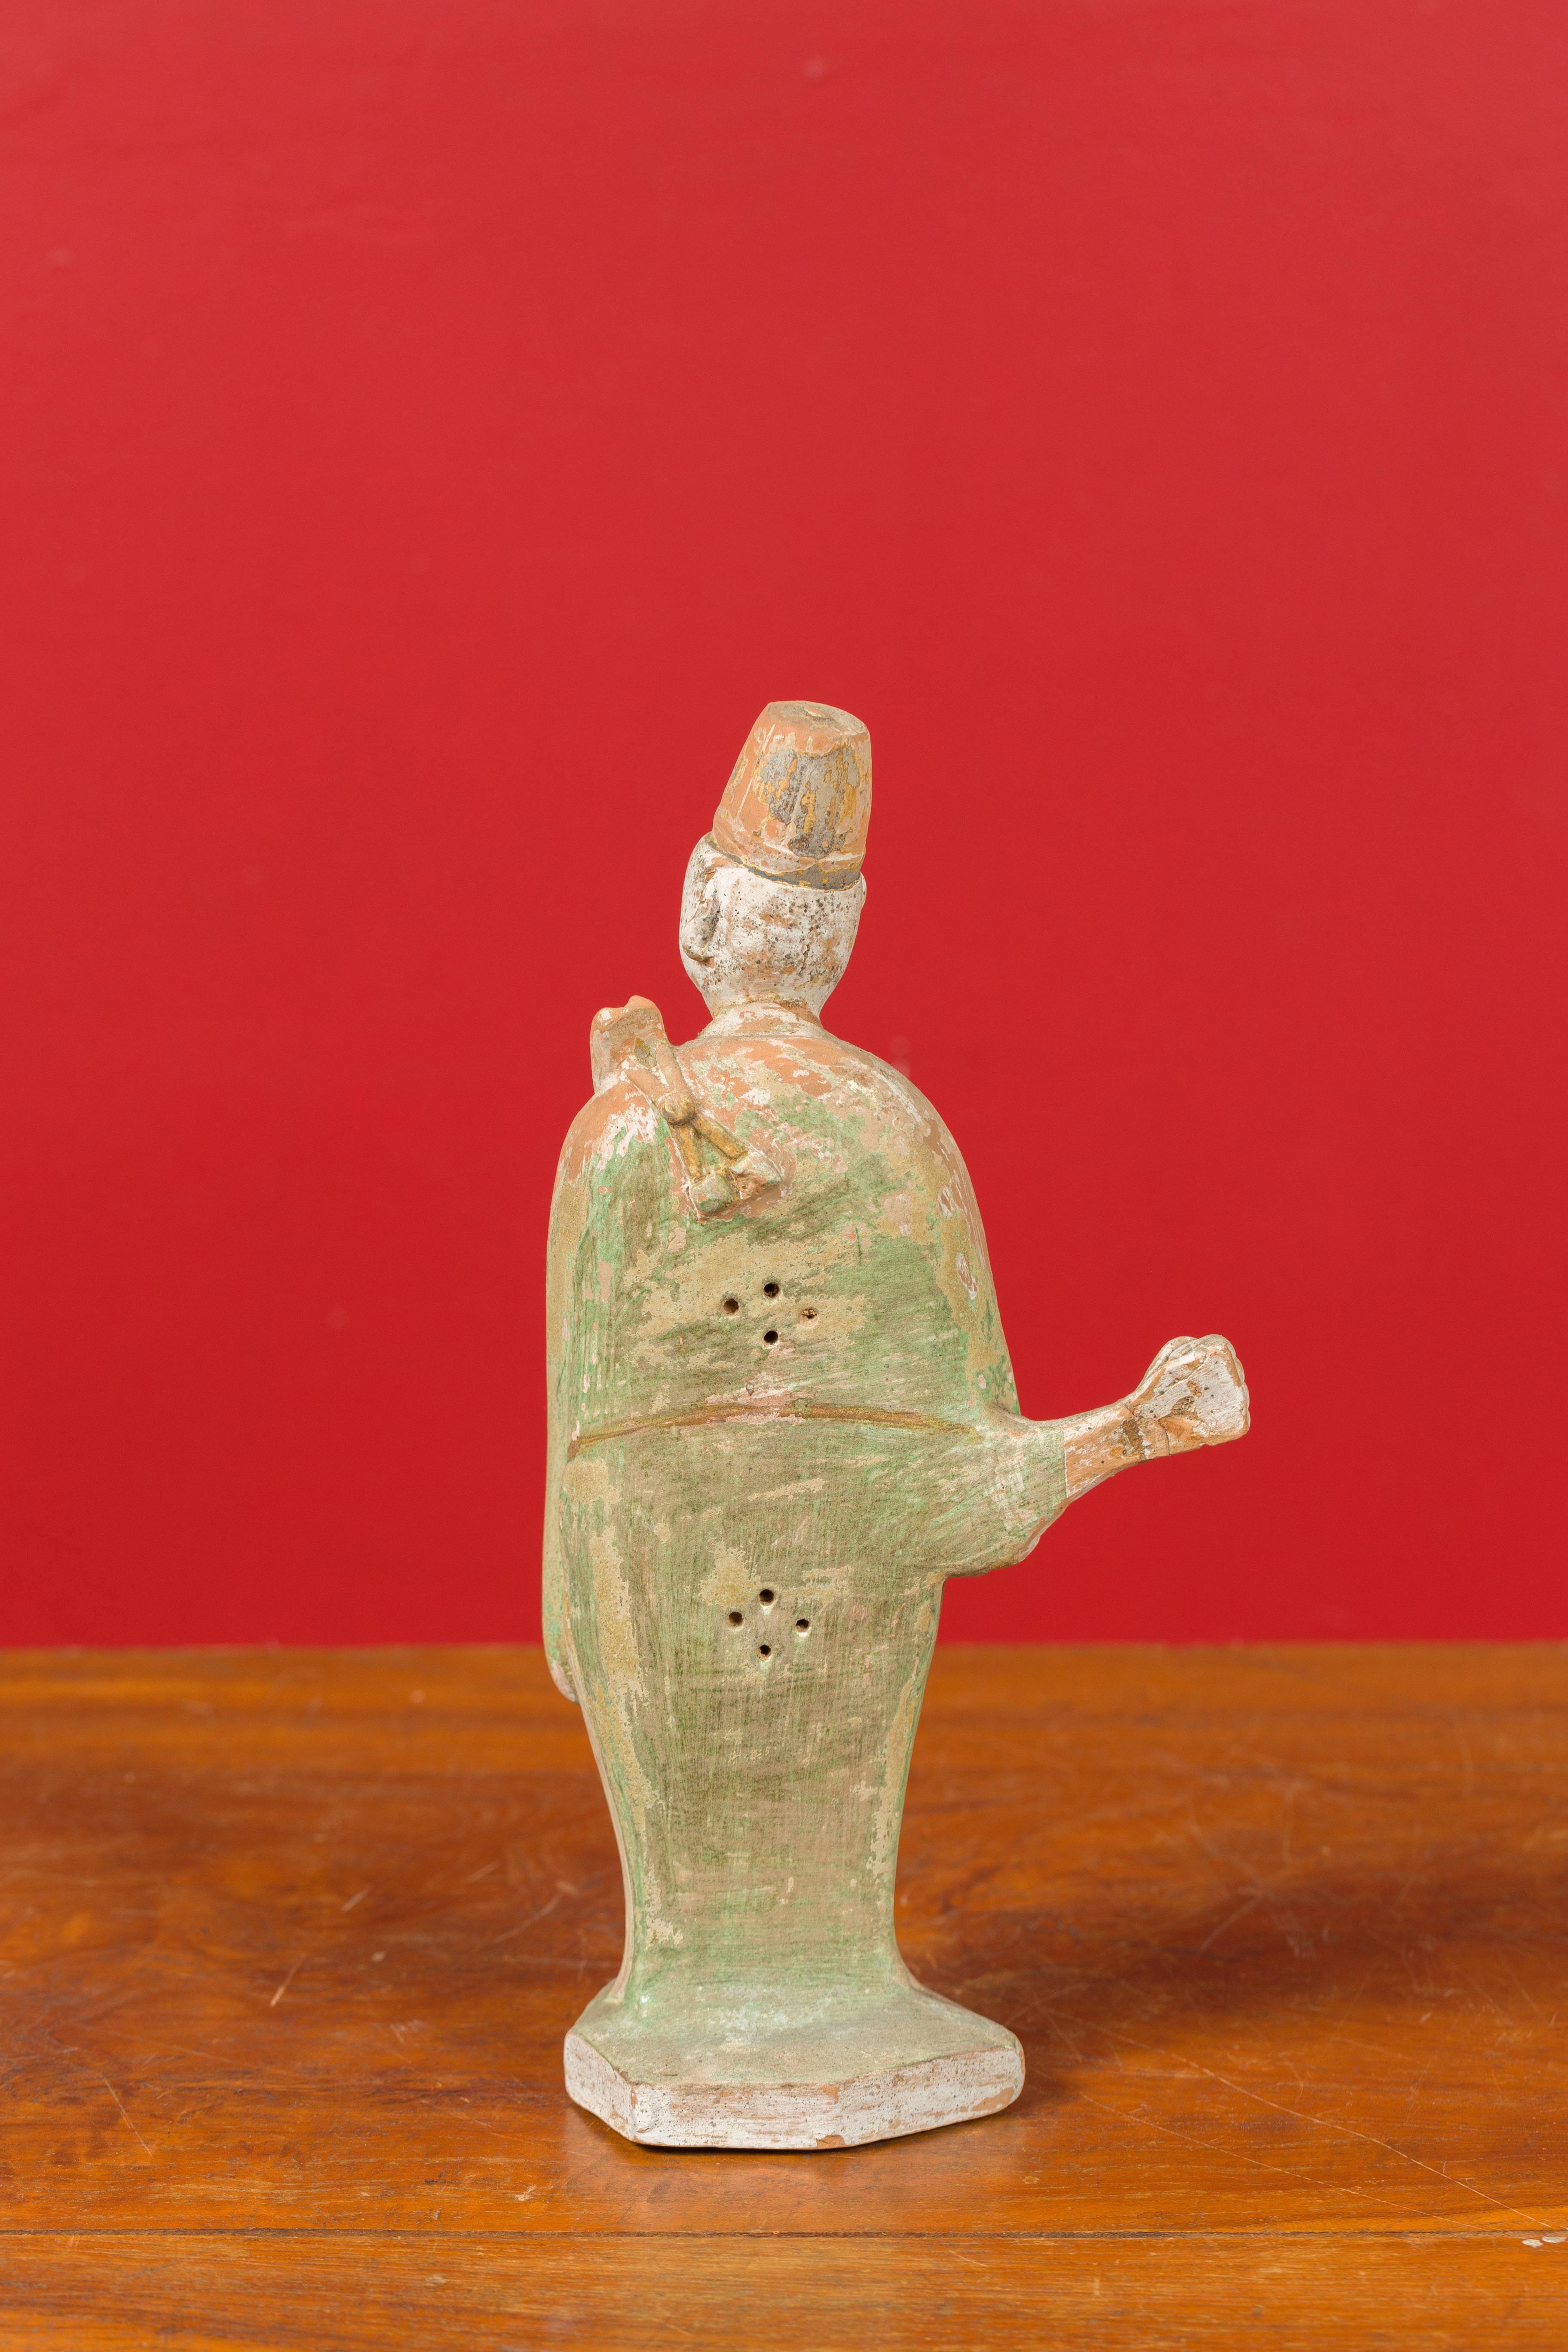 Chinese Ming Dynasty Terracotta Courtsman Statuette with Original Polychromy For Sale 2